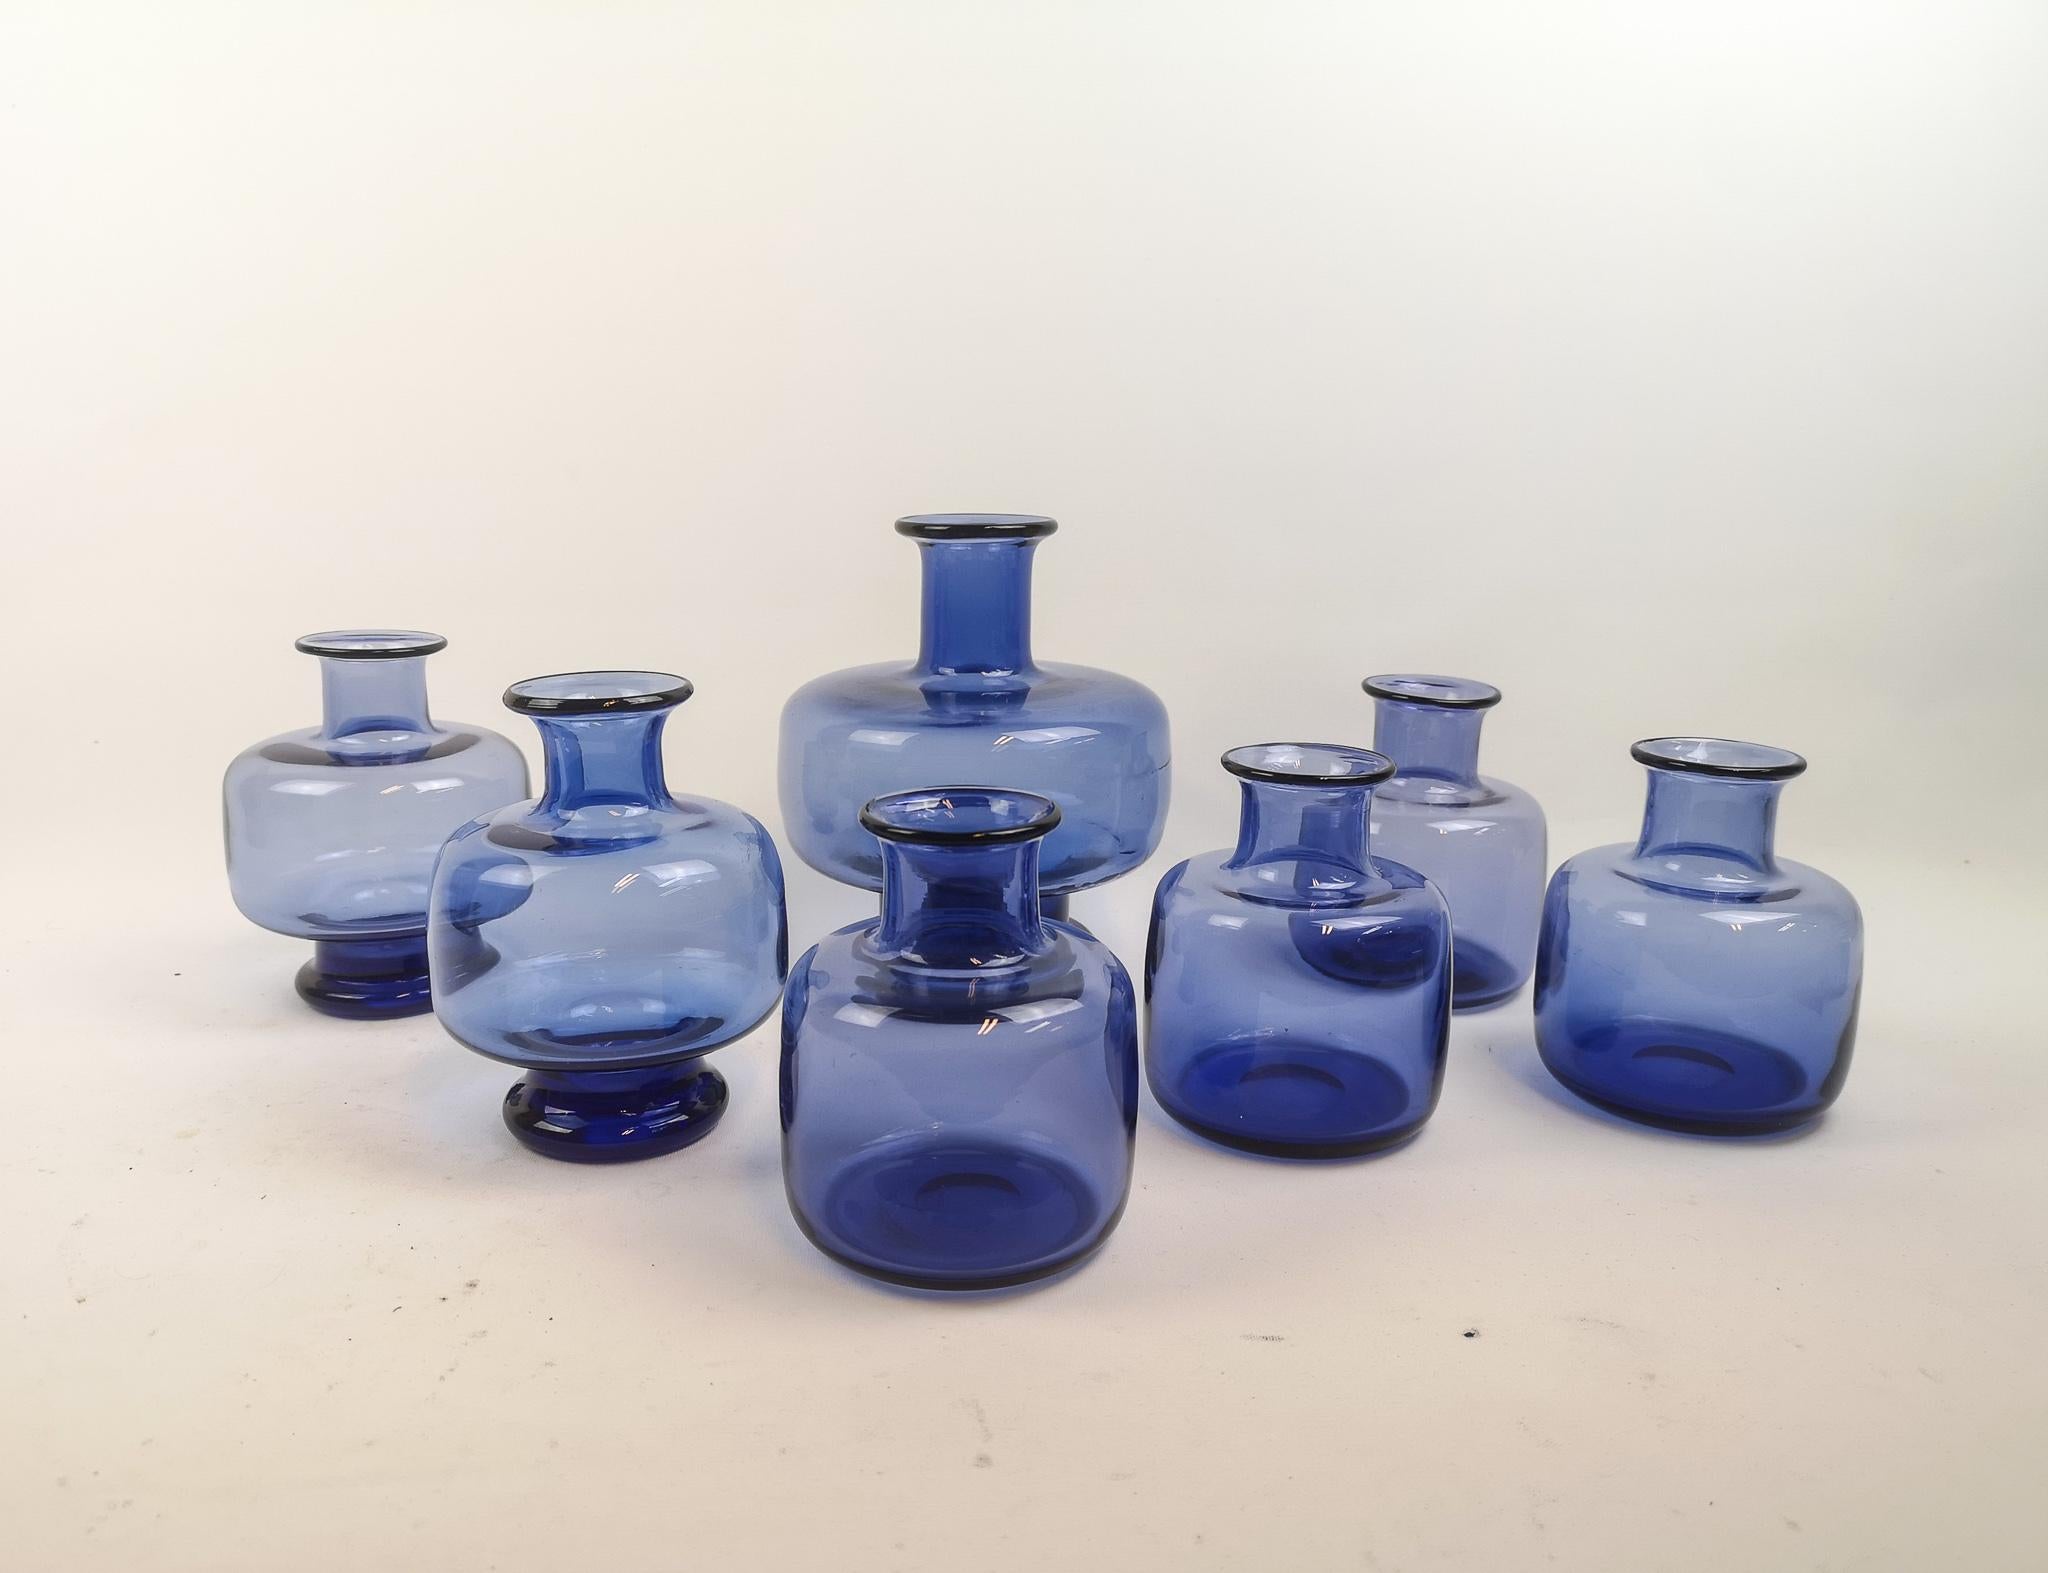 This set of seven small / medium vases in generous blue clear color, was produced by Danish company Holmegaard and designed by Per Lutken.

The set works wonderful together and can gives that extra to an atmosphere without taking too much